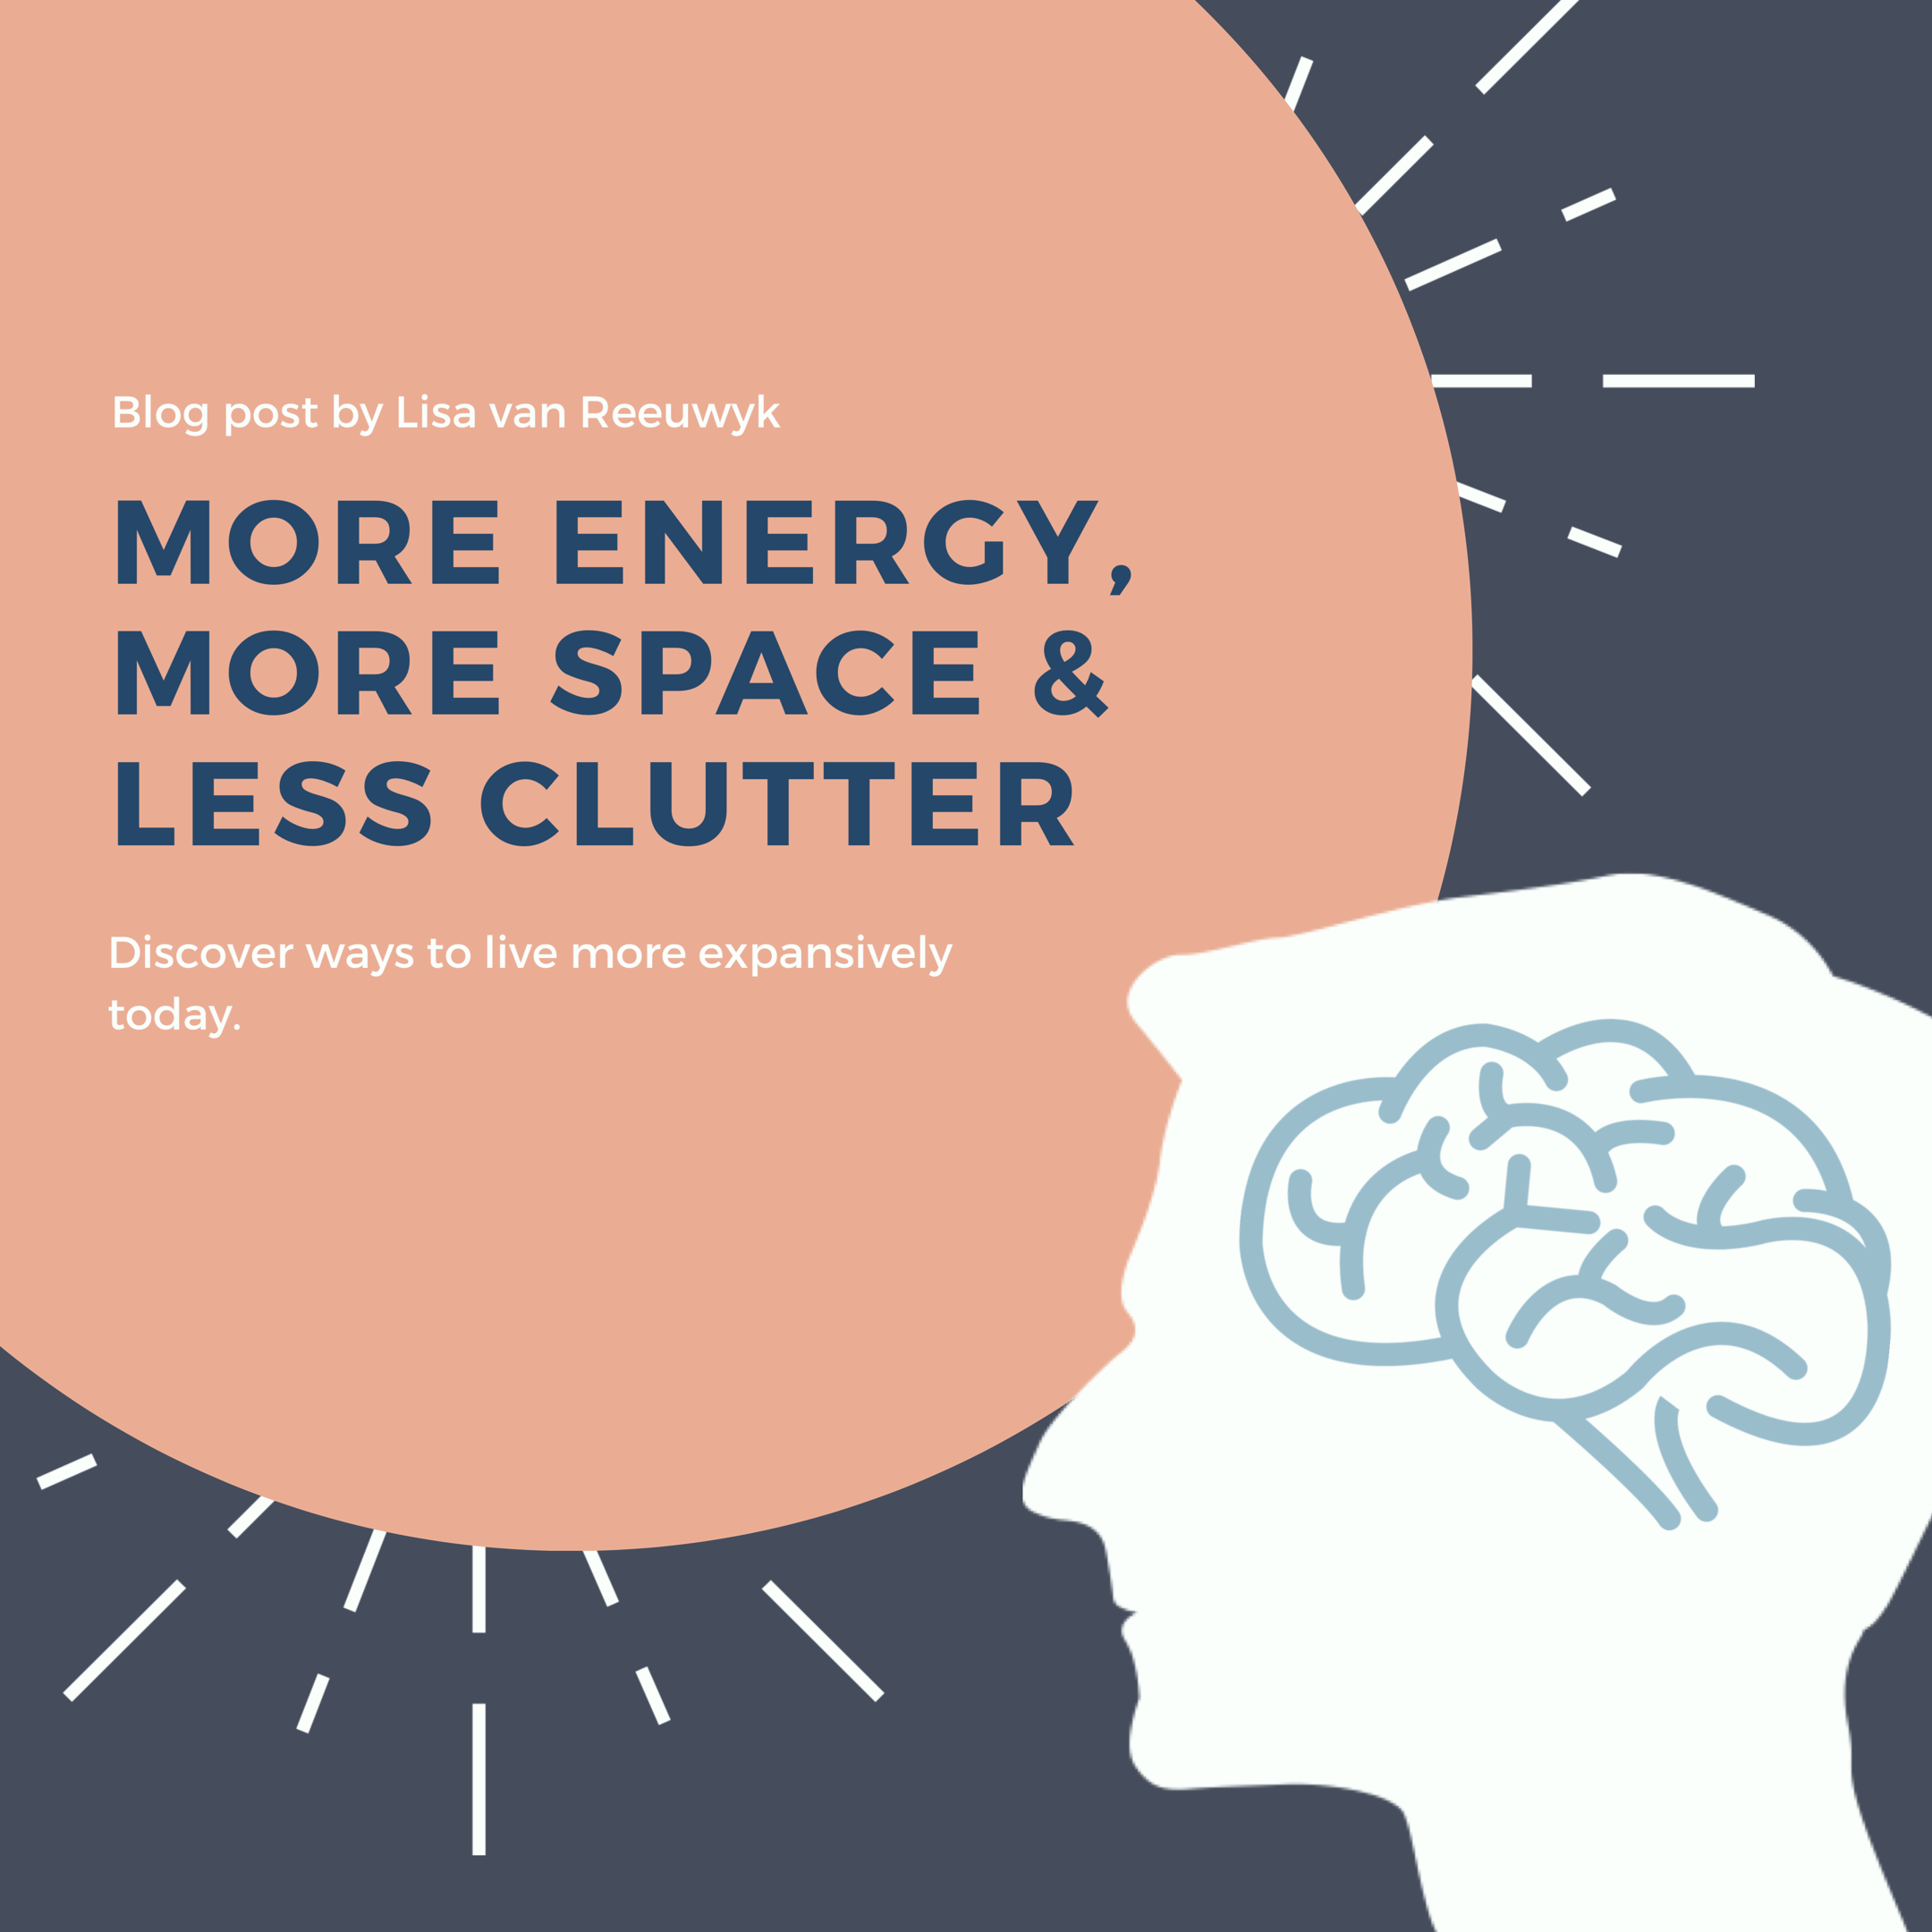 More energy, more space and less clutter